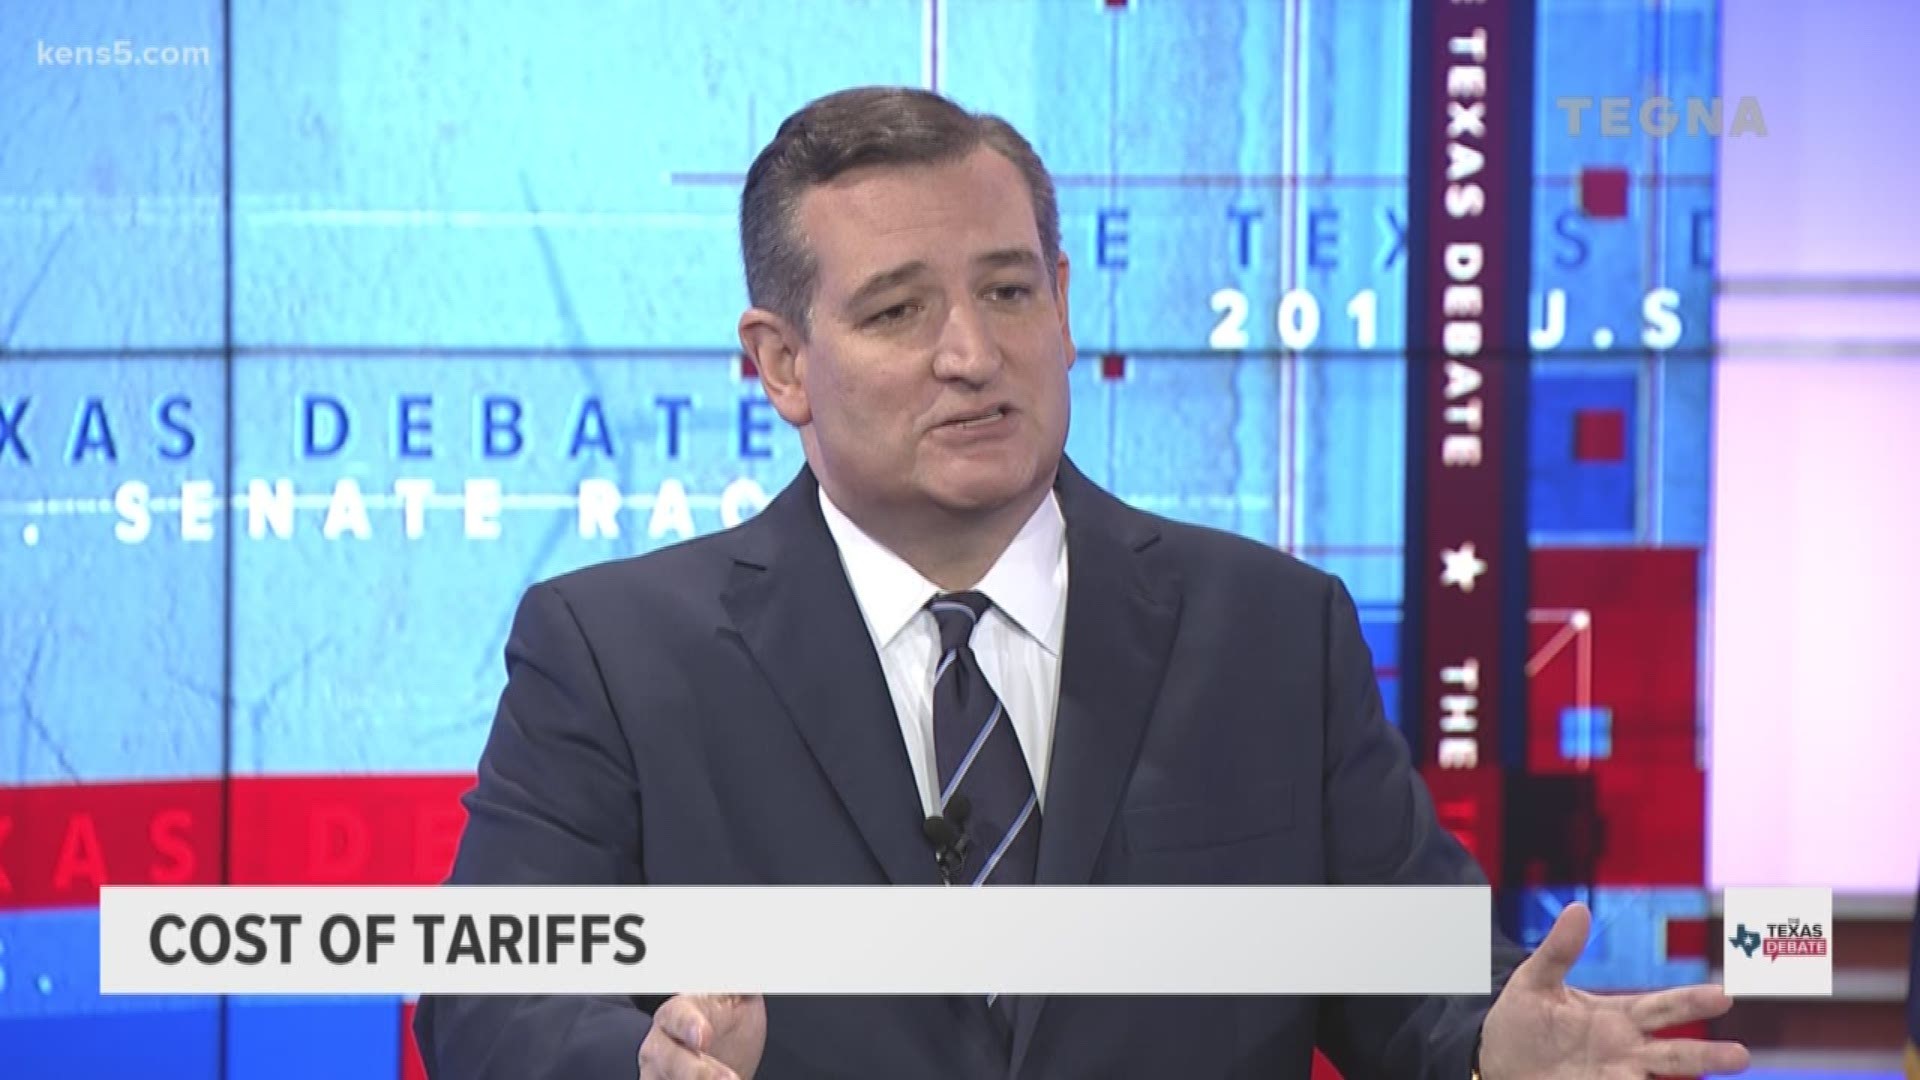 Both Cruz and O'Rourke have spoken out on trade. But the incumbent says he's able to work with the president to hash out the issues.